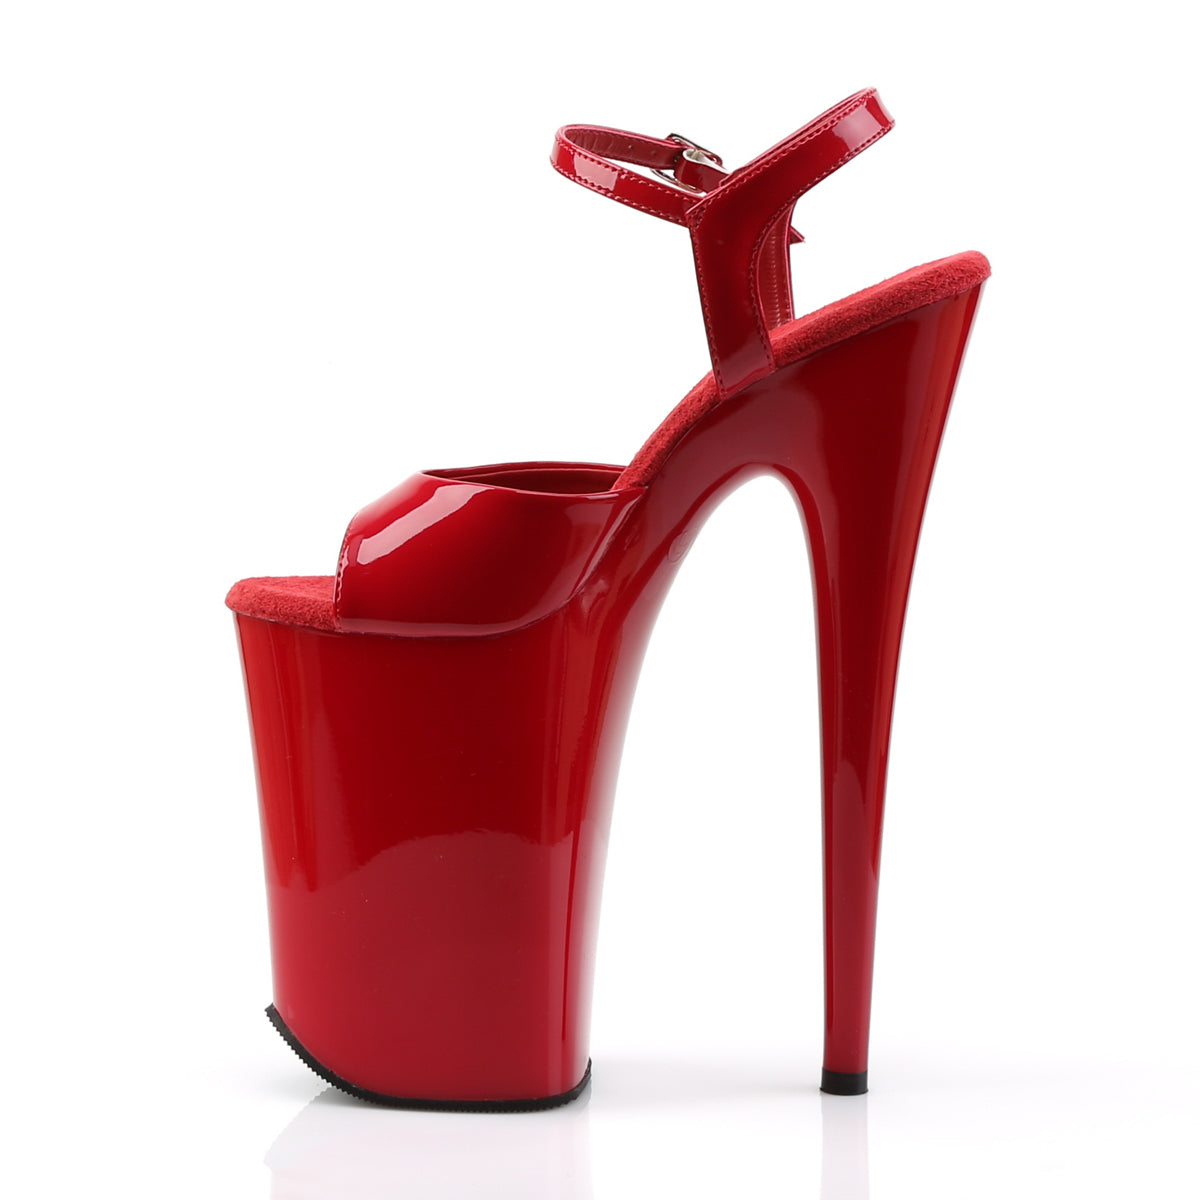 INFINITY-909 Pleaser Red/Red Platform Shoes [9 Inch High Heels]